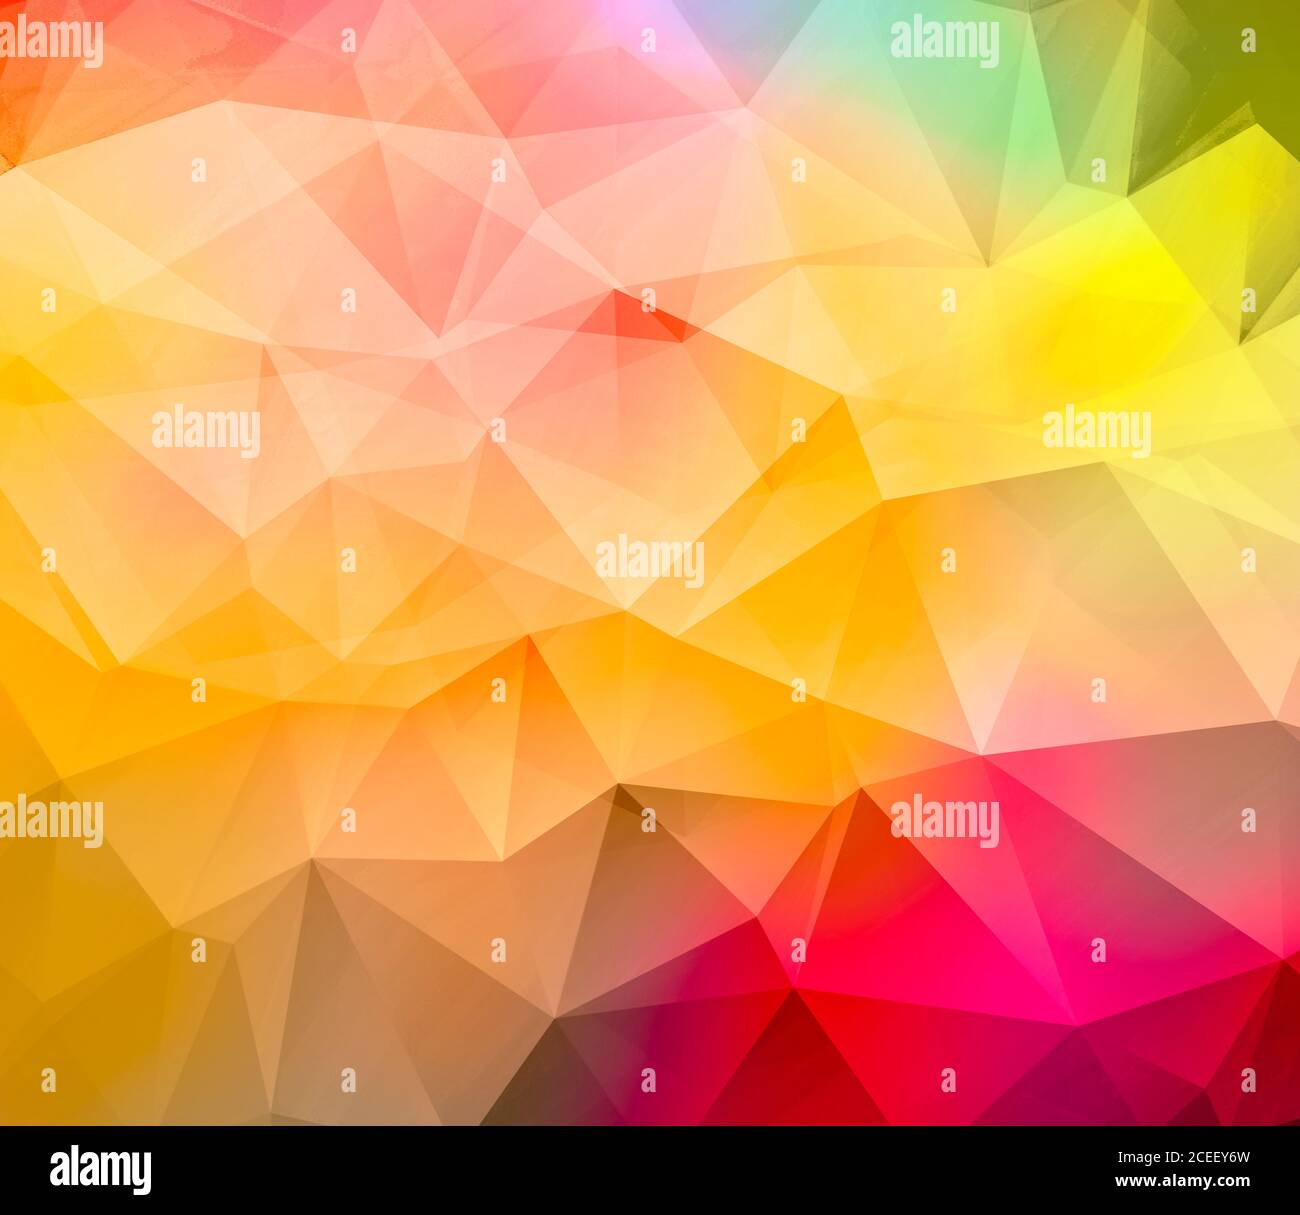 triangular abstract background Stock Photo